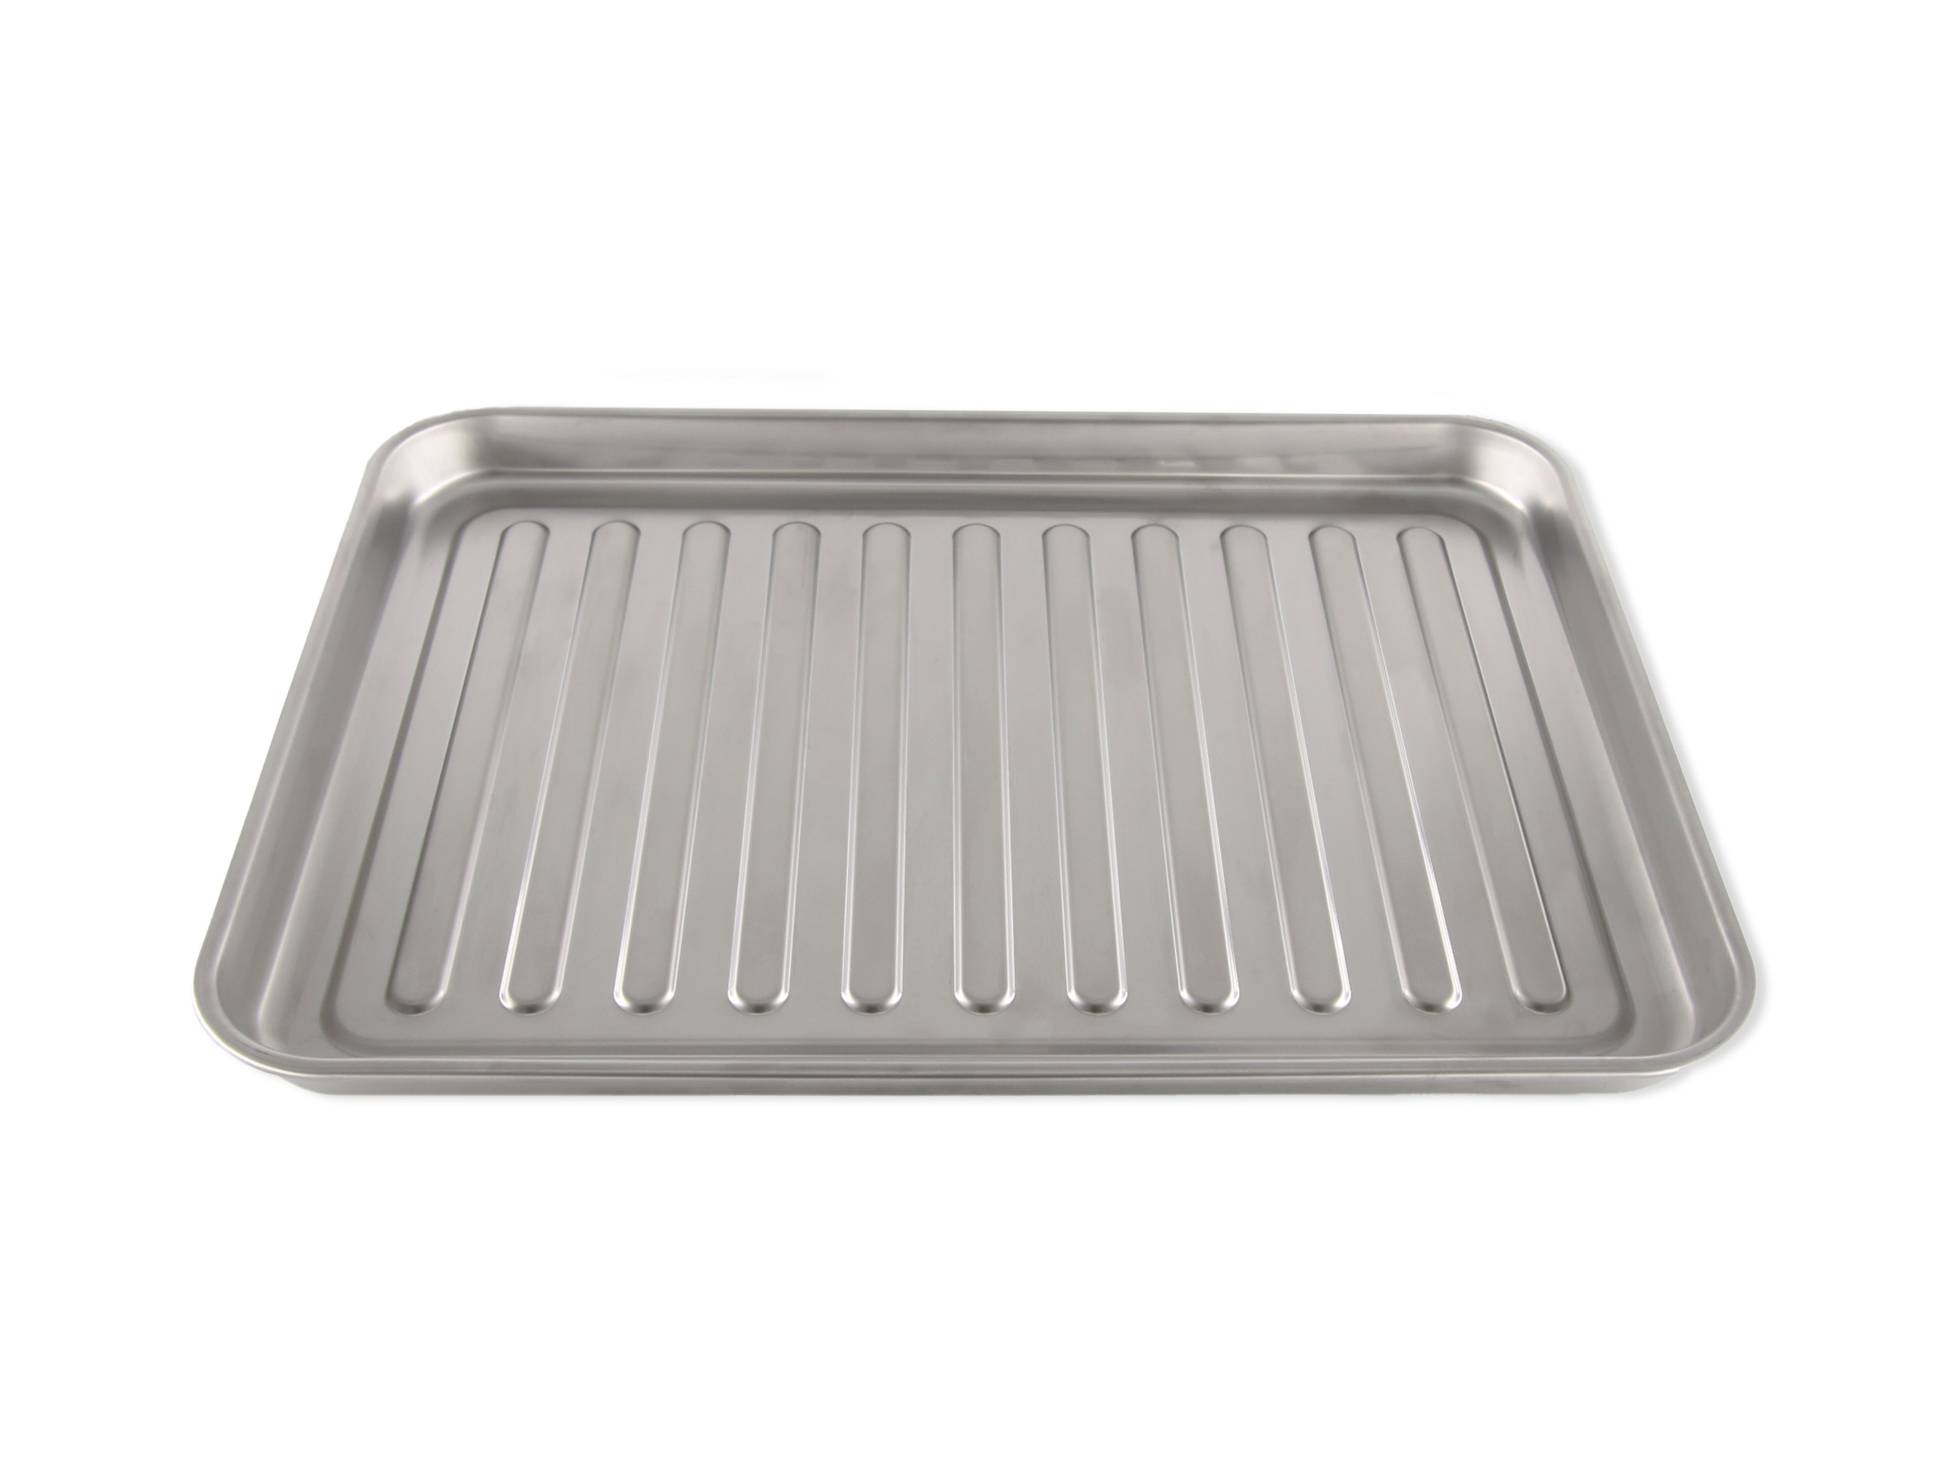 https://cld.accentuate.io/7485446684861/1686945356187/OvenTray(2)-4472x3354.jpg?v=1686945356187&options=w_1946